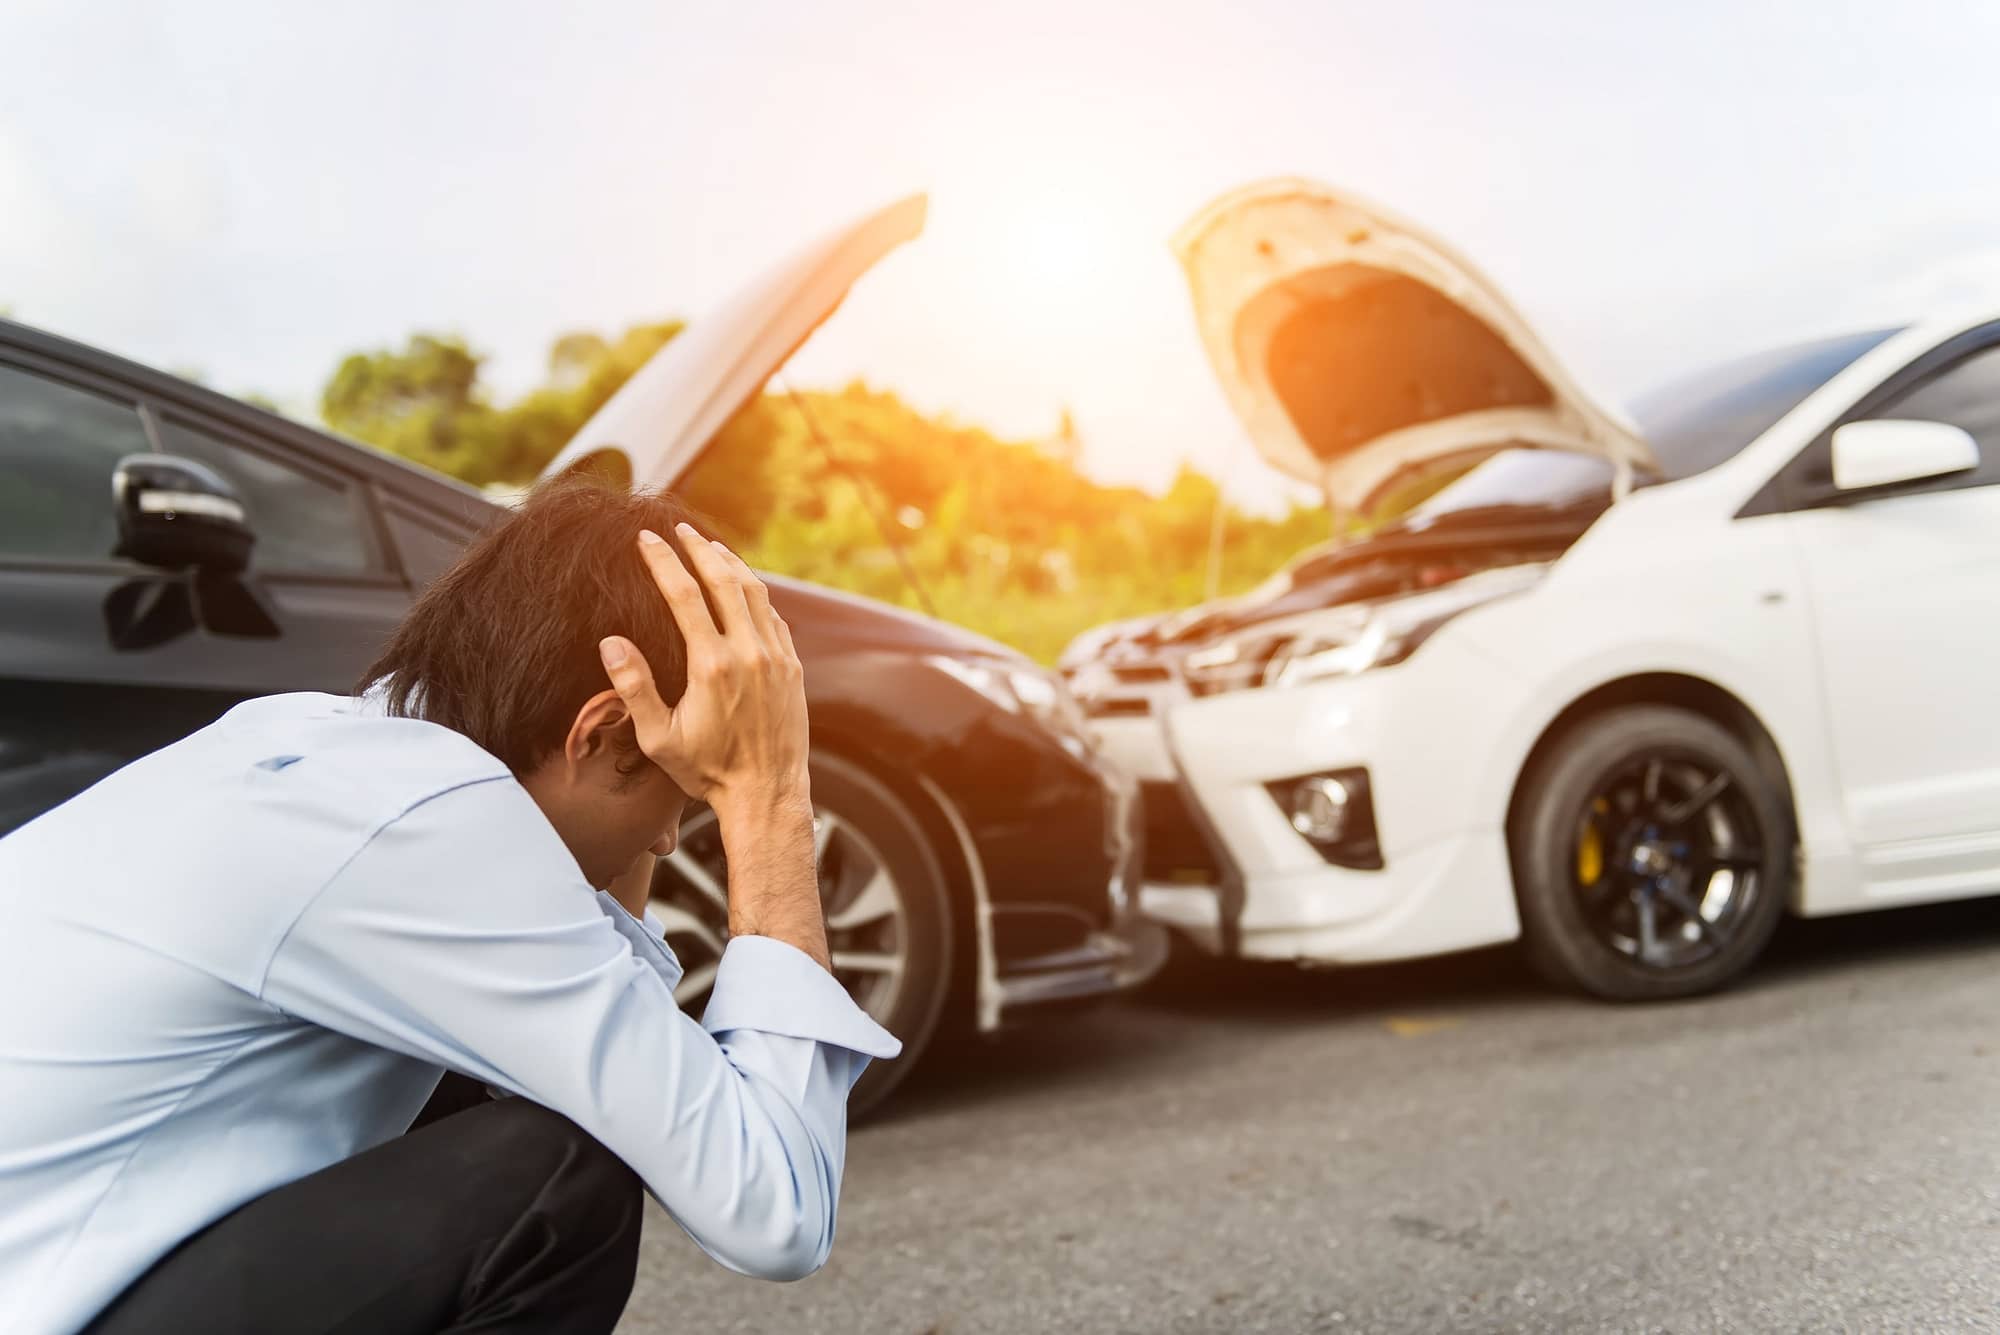 get an attorney after a car accident. Compensation. Car accident. Injury